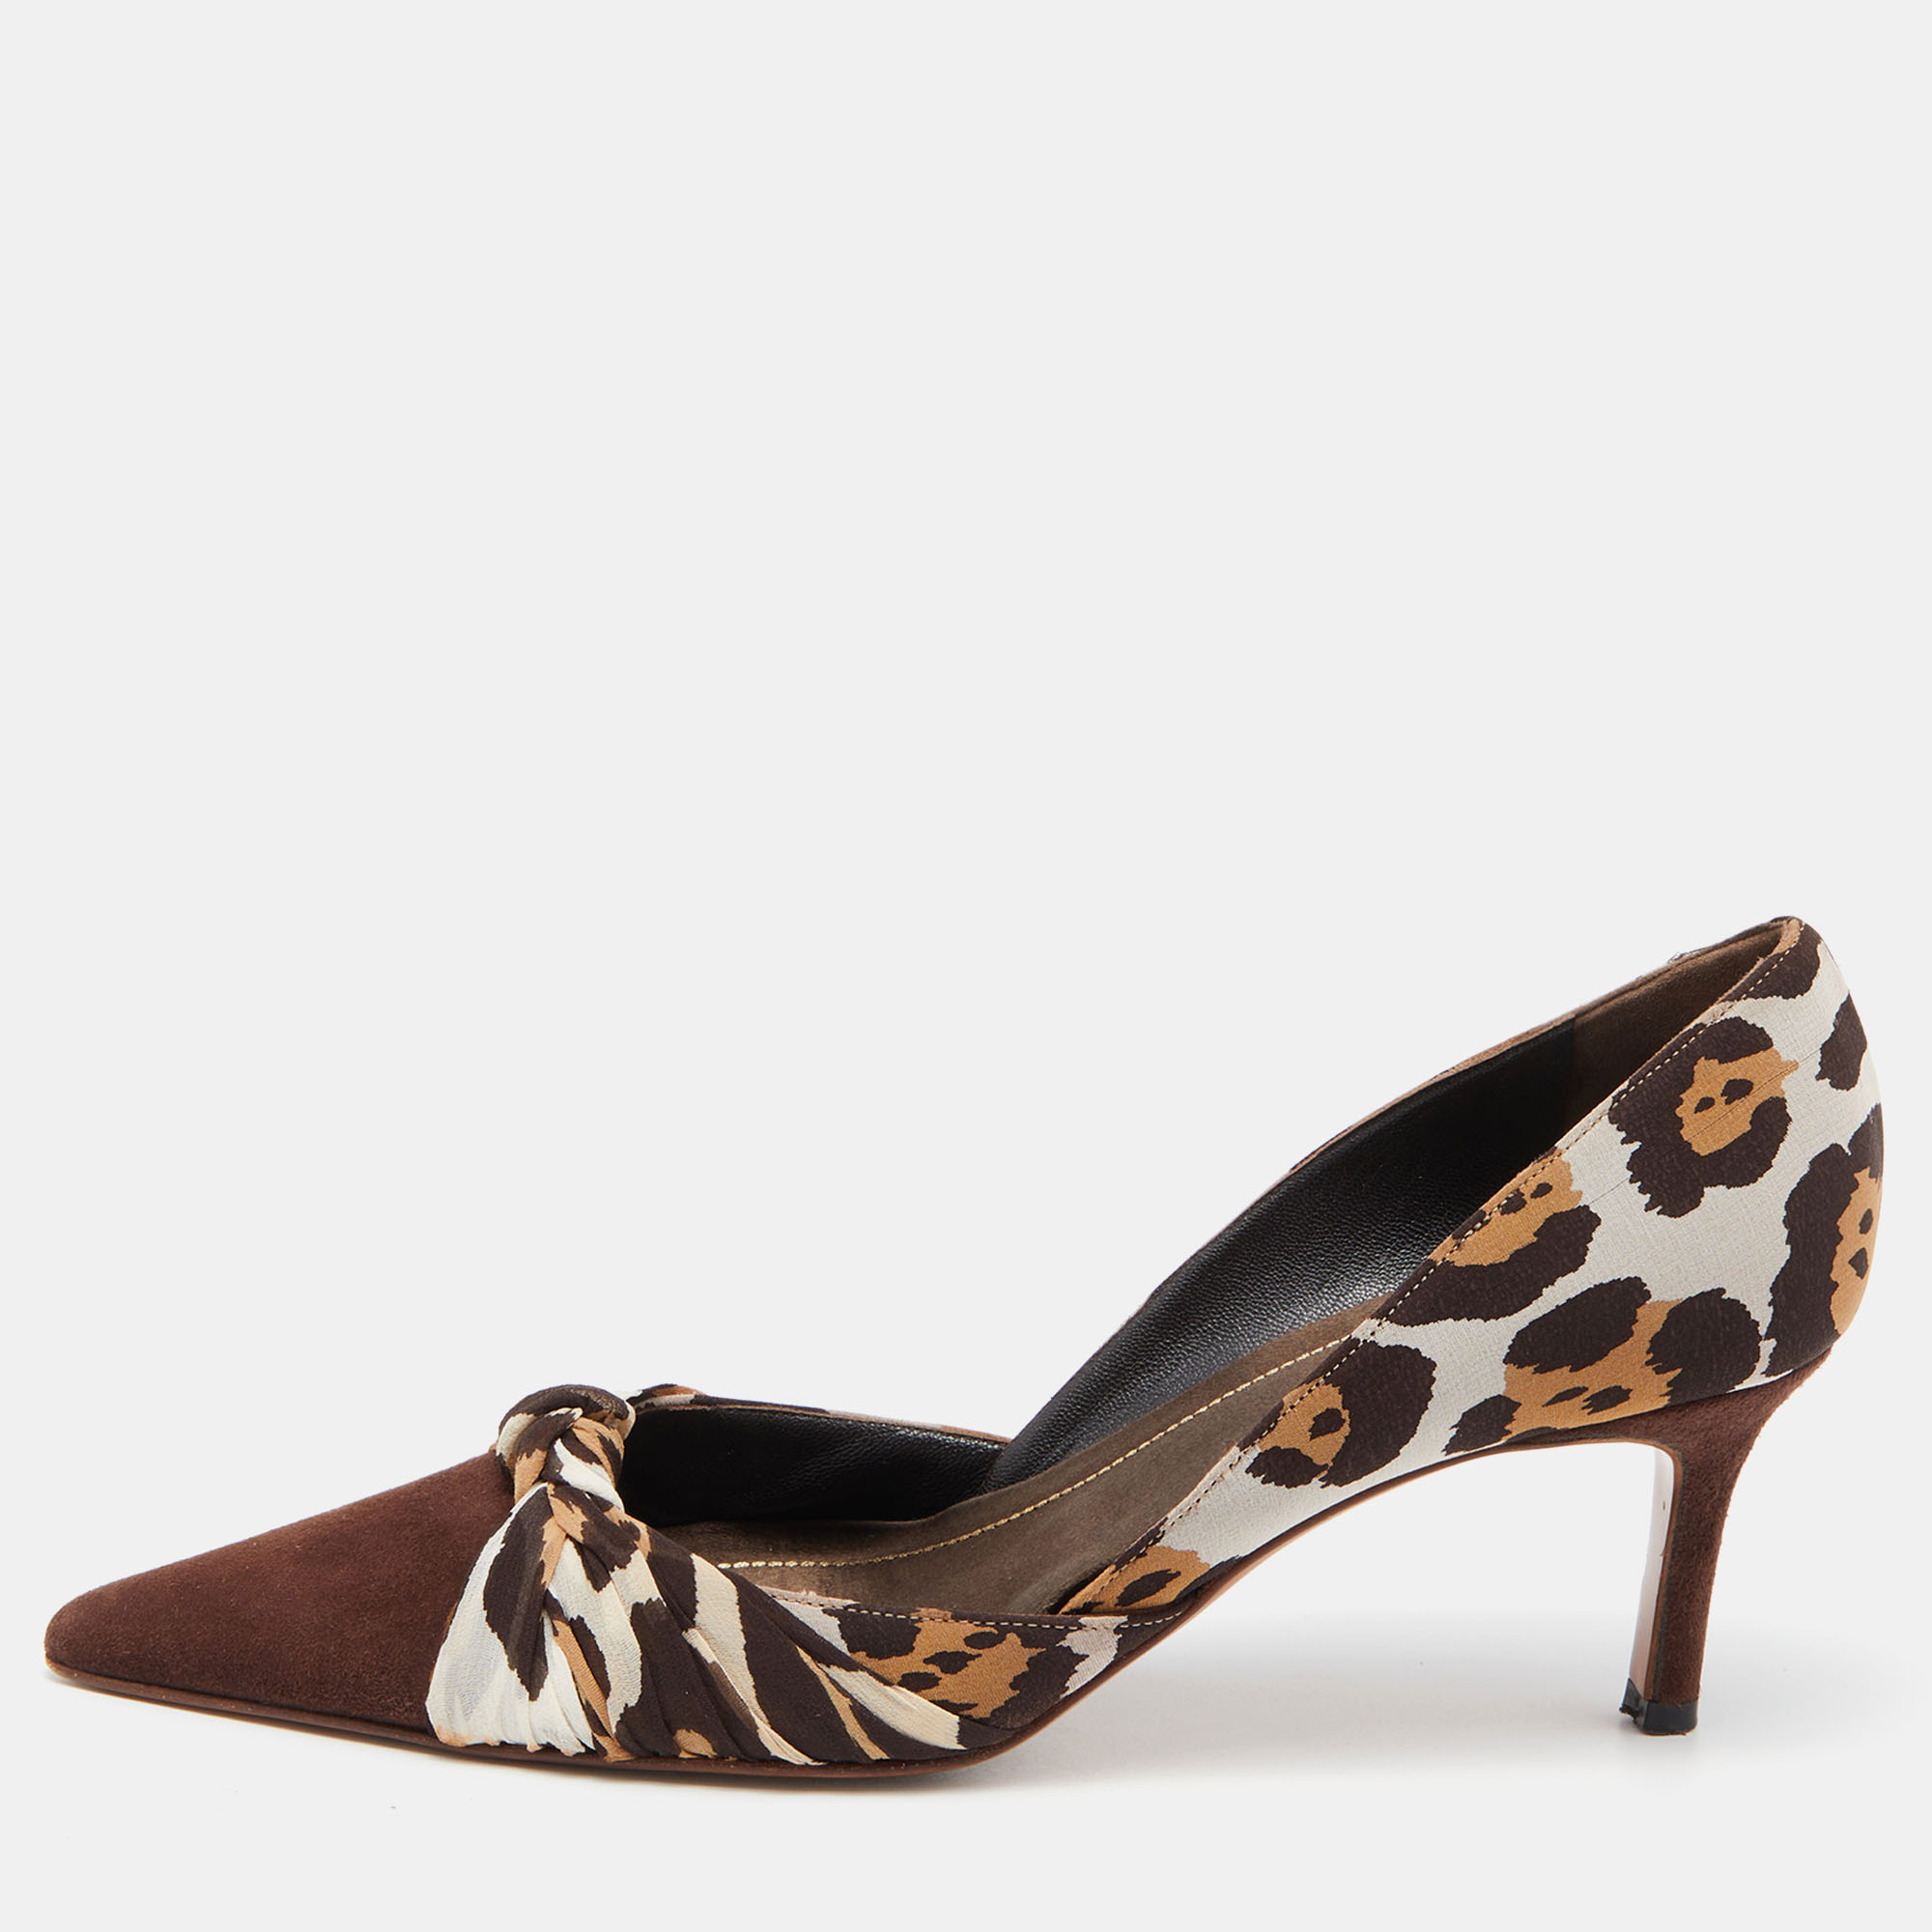 René Caovilla Brown Leopard Print Fabric And Suede Knotted Pointed Toe Pumps Size 38